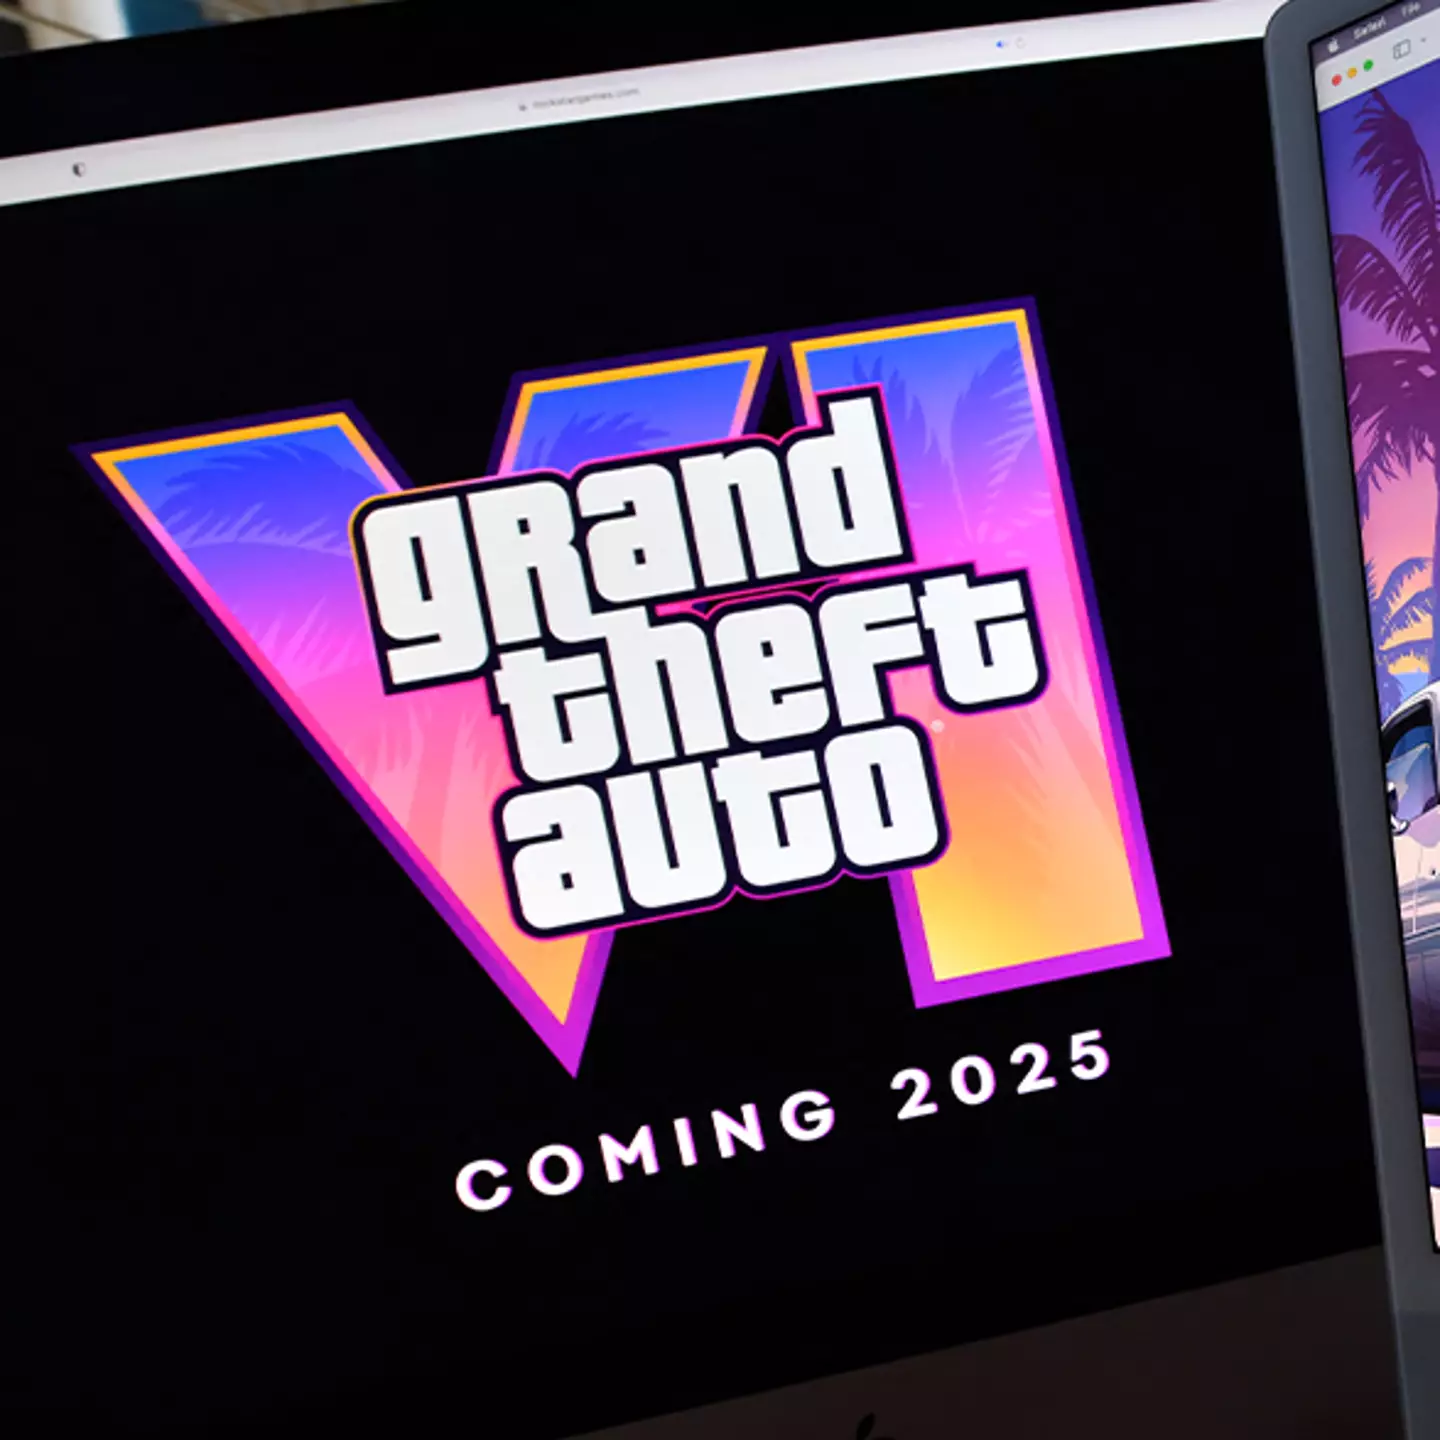 New GTA 6 leaks reveal something big could be coming in May